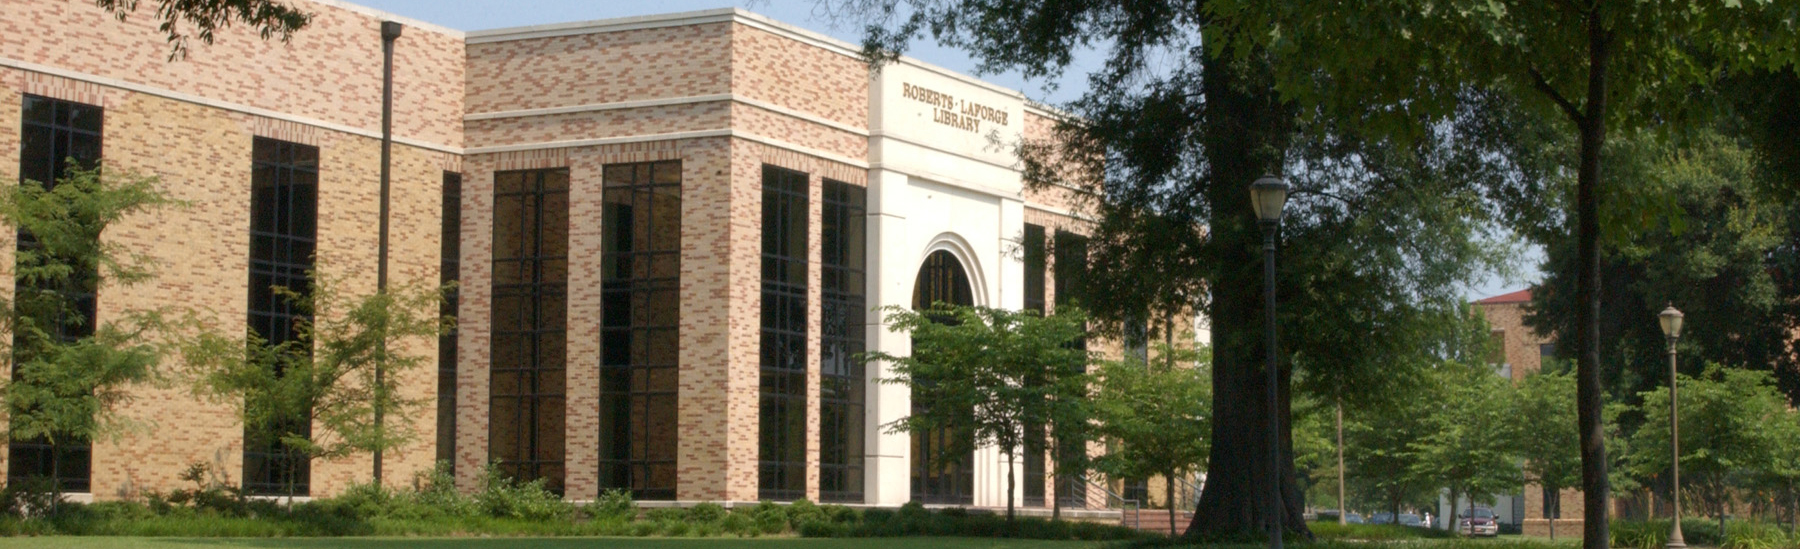 Roberts-LaForge Library